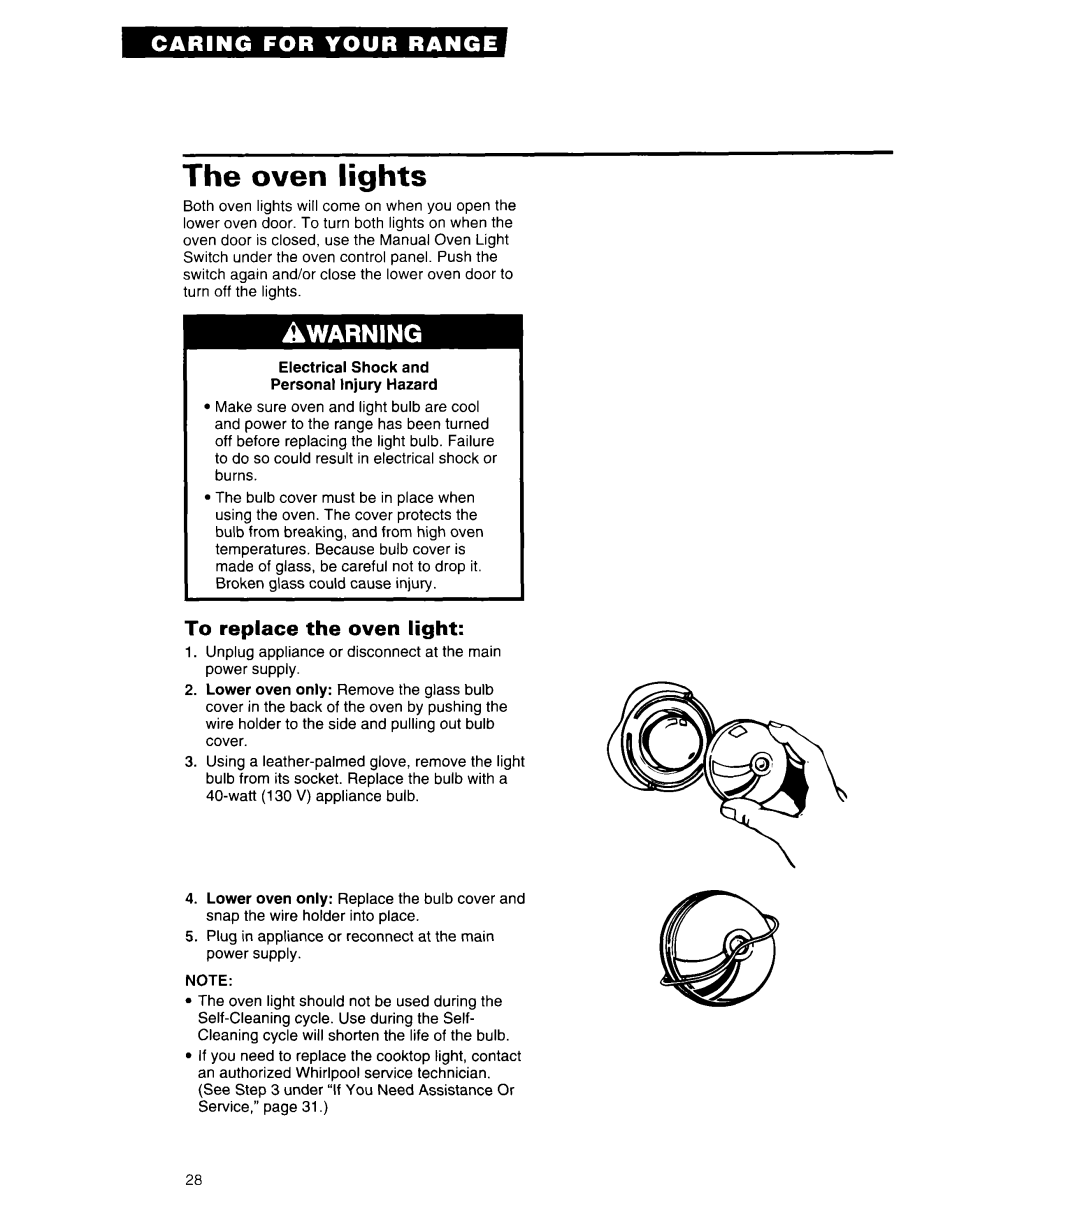 Whirlpool RE960PXY important safety instructions The oven lights, To replace the oven light 